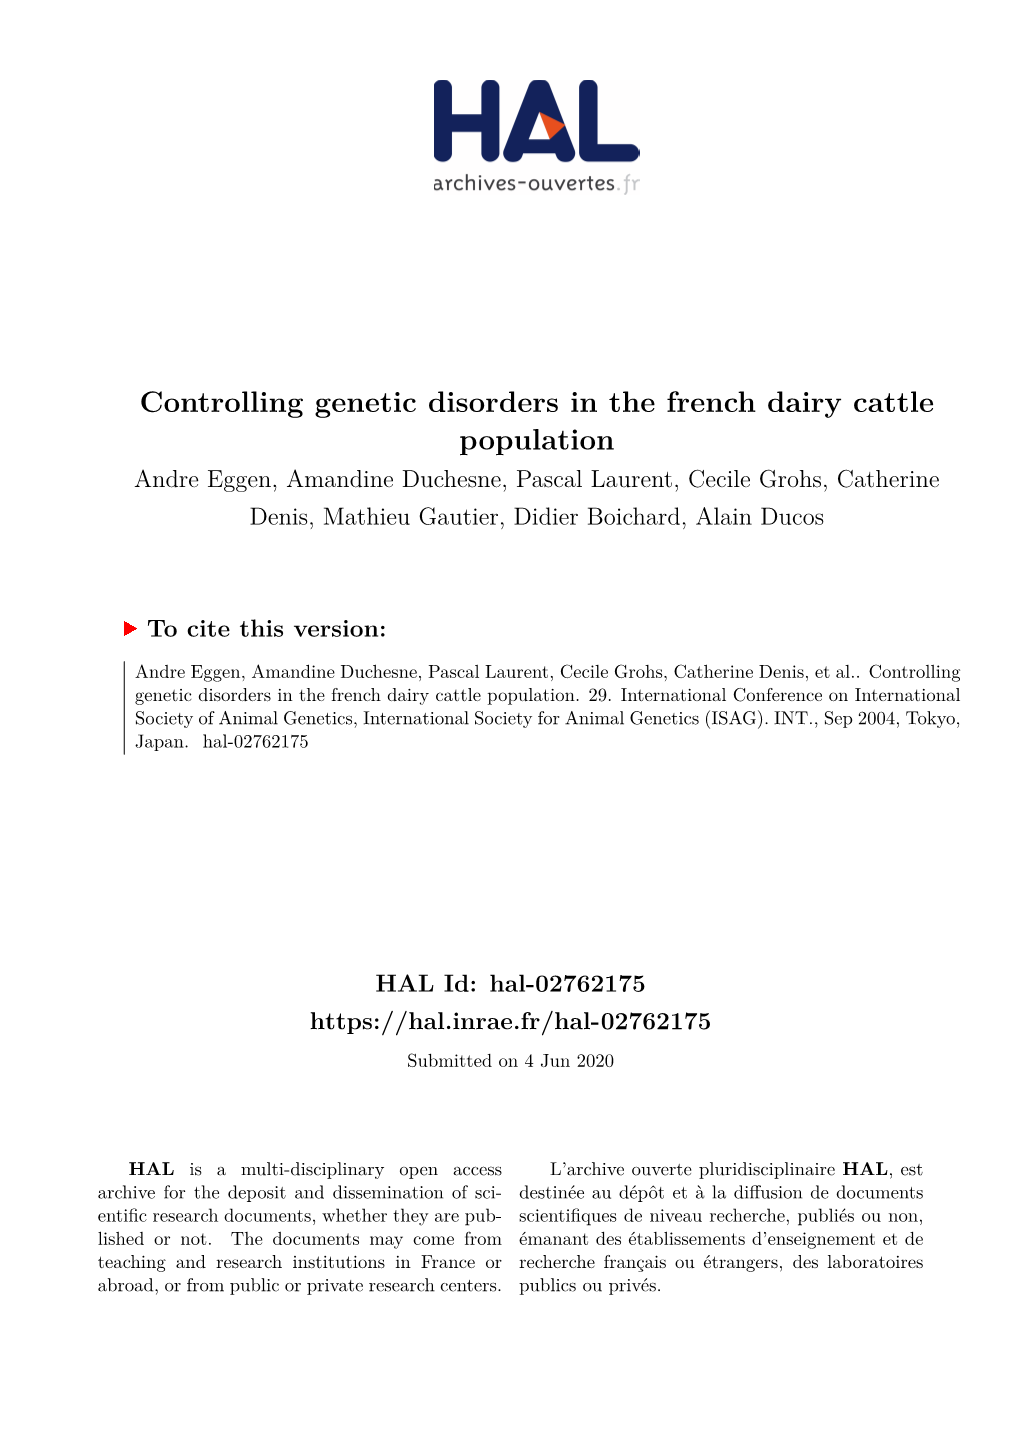 Controlling Genetic Disorders in the French Dairy Cattle Population